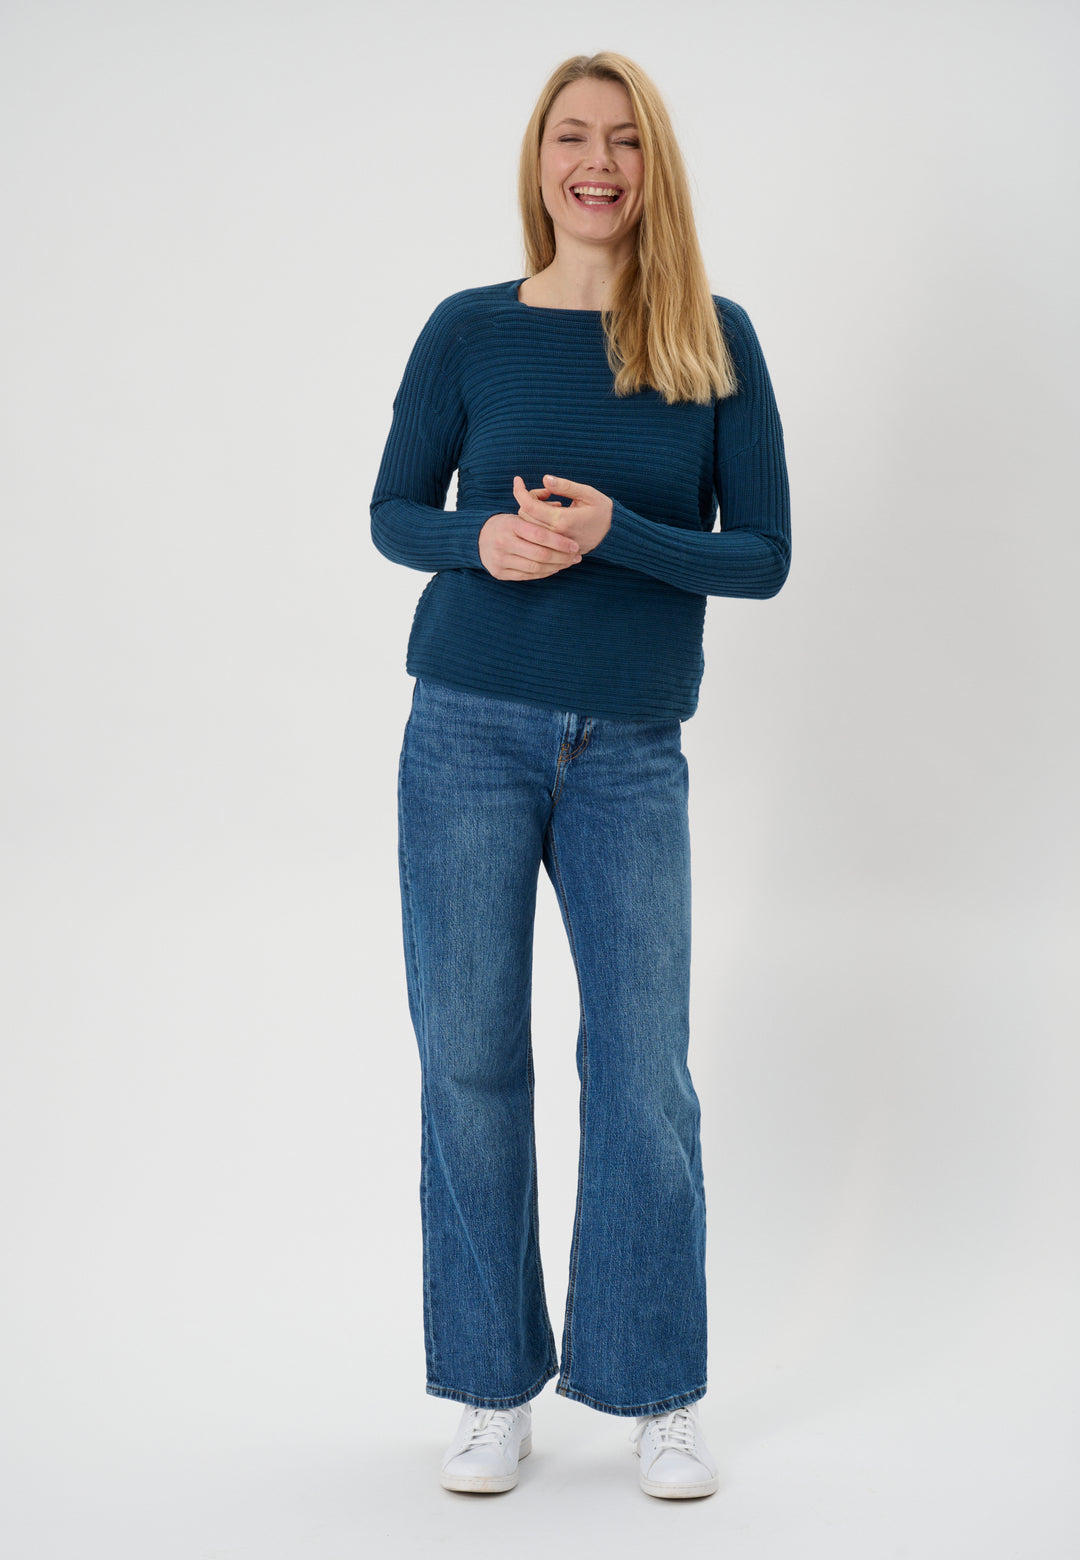 Lind Mona Knit Pullover 5995 Navy